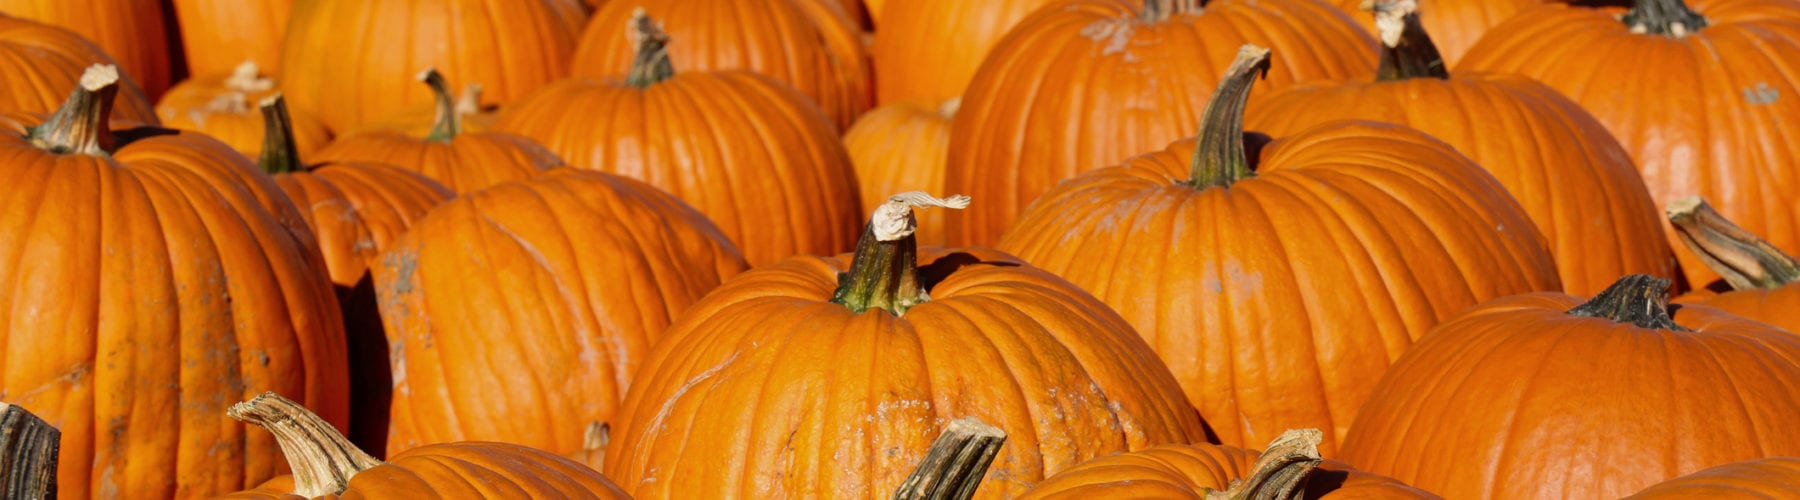 Pumpkin Patch is one of the things to do in Austin in October